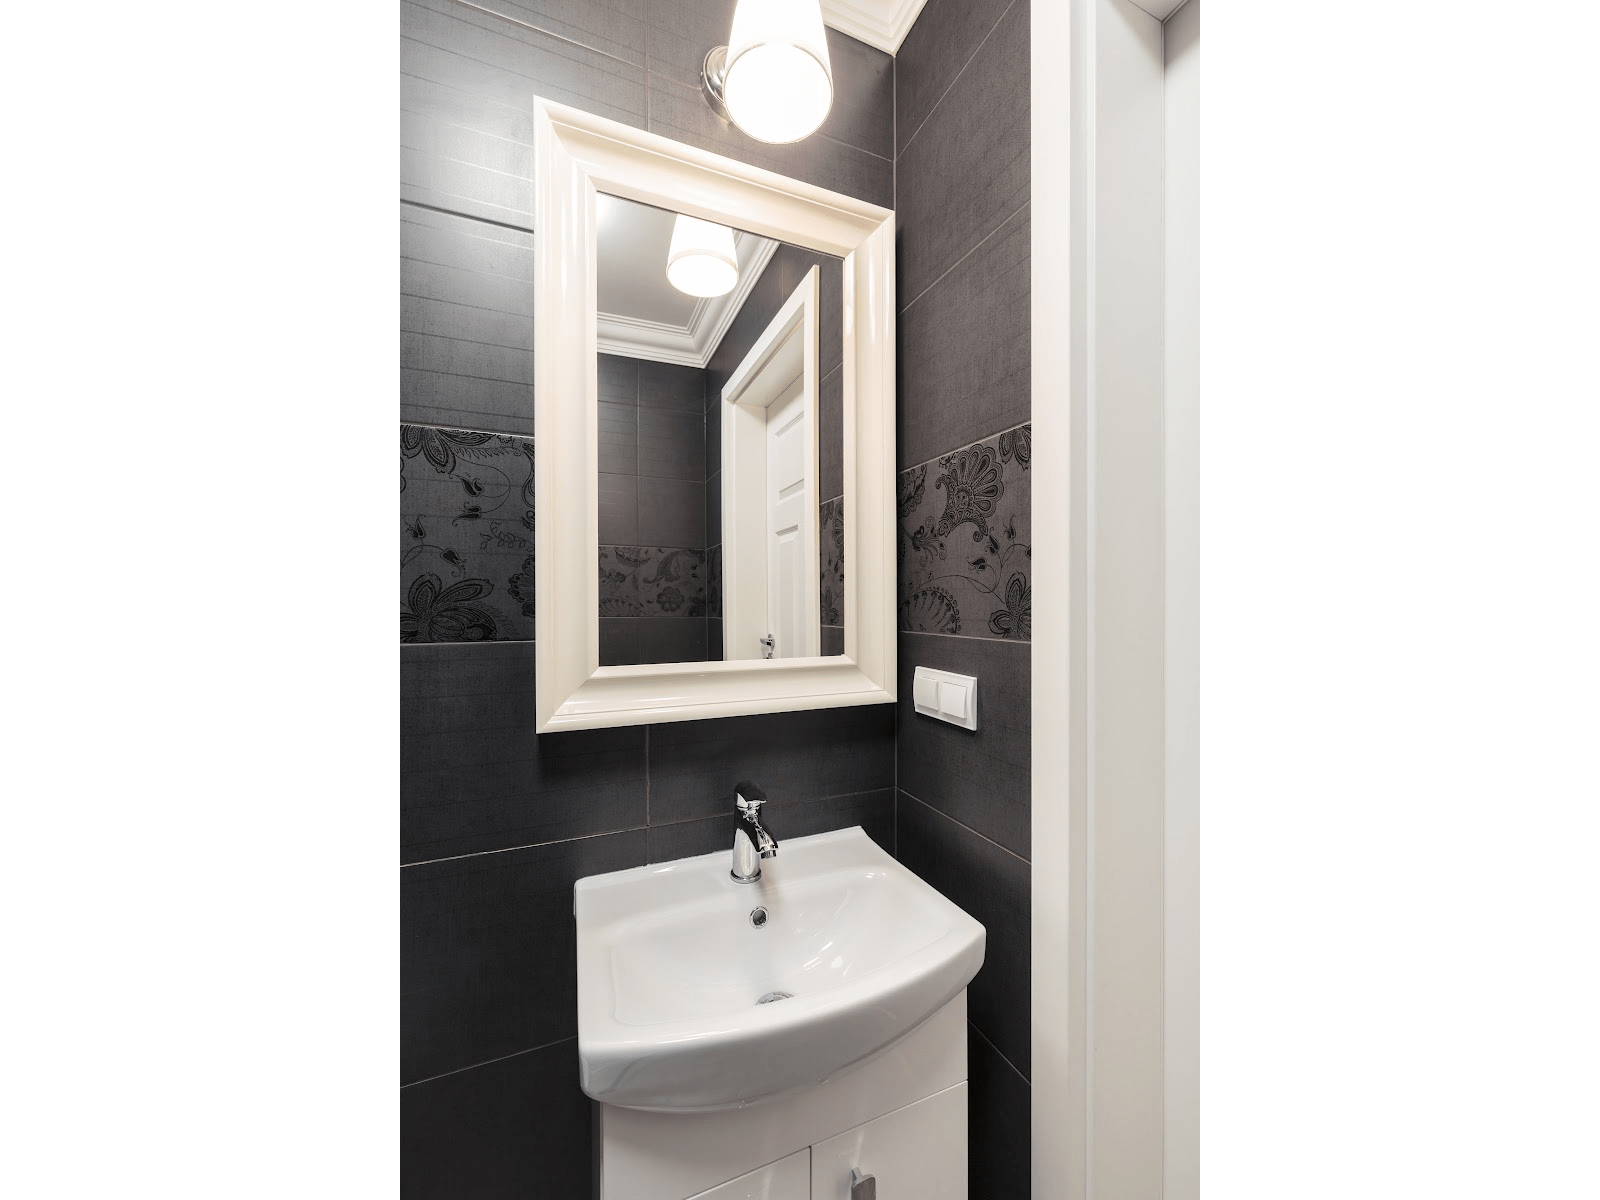 Why Lighting In Your Bathroom Can Make A Big Difference in A Small Space